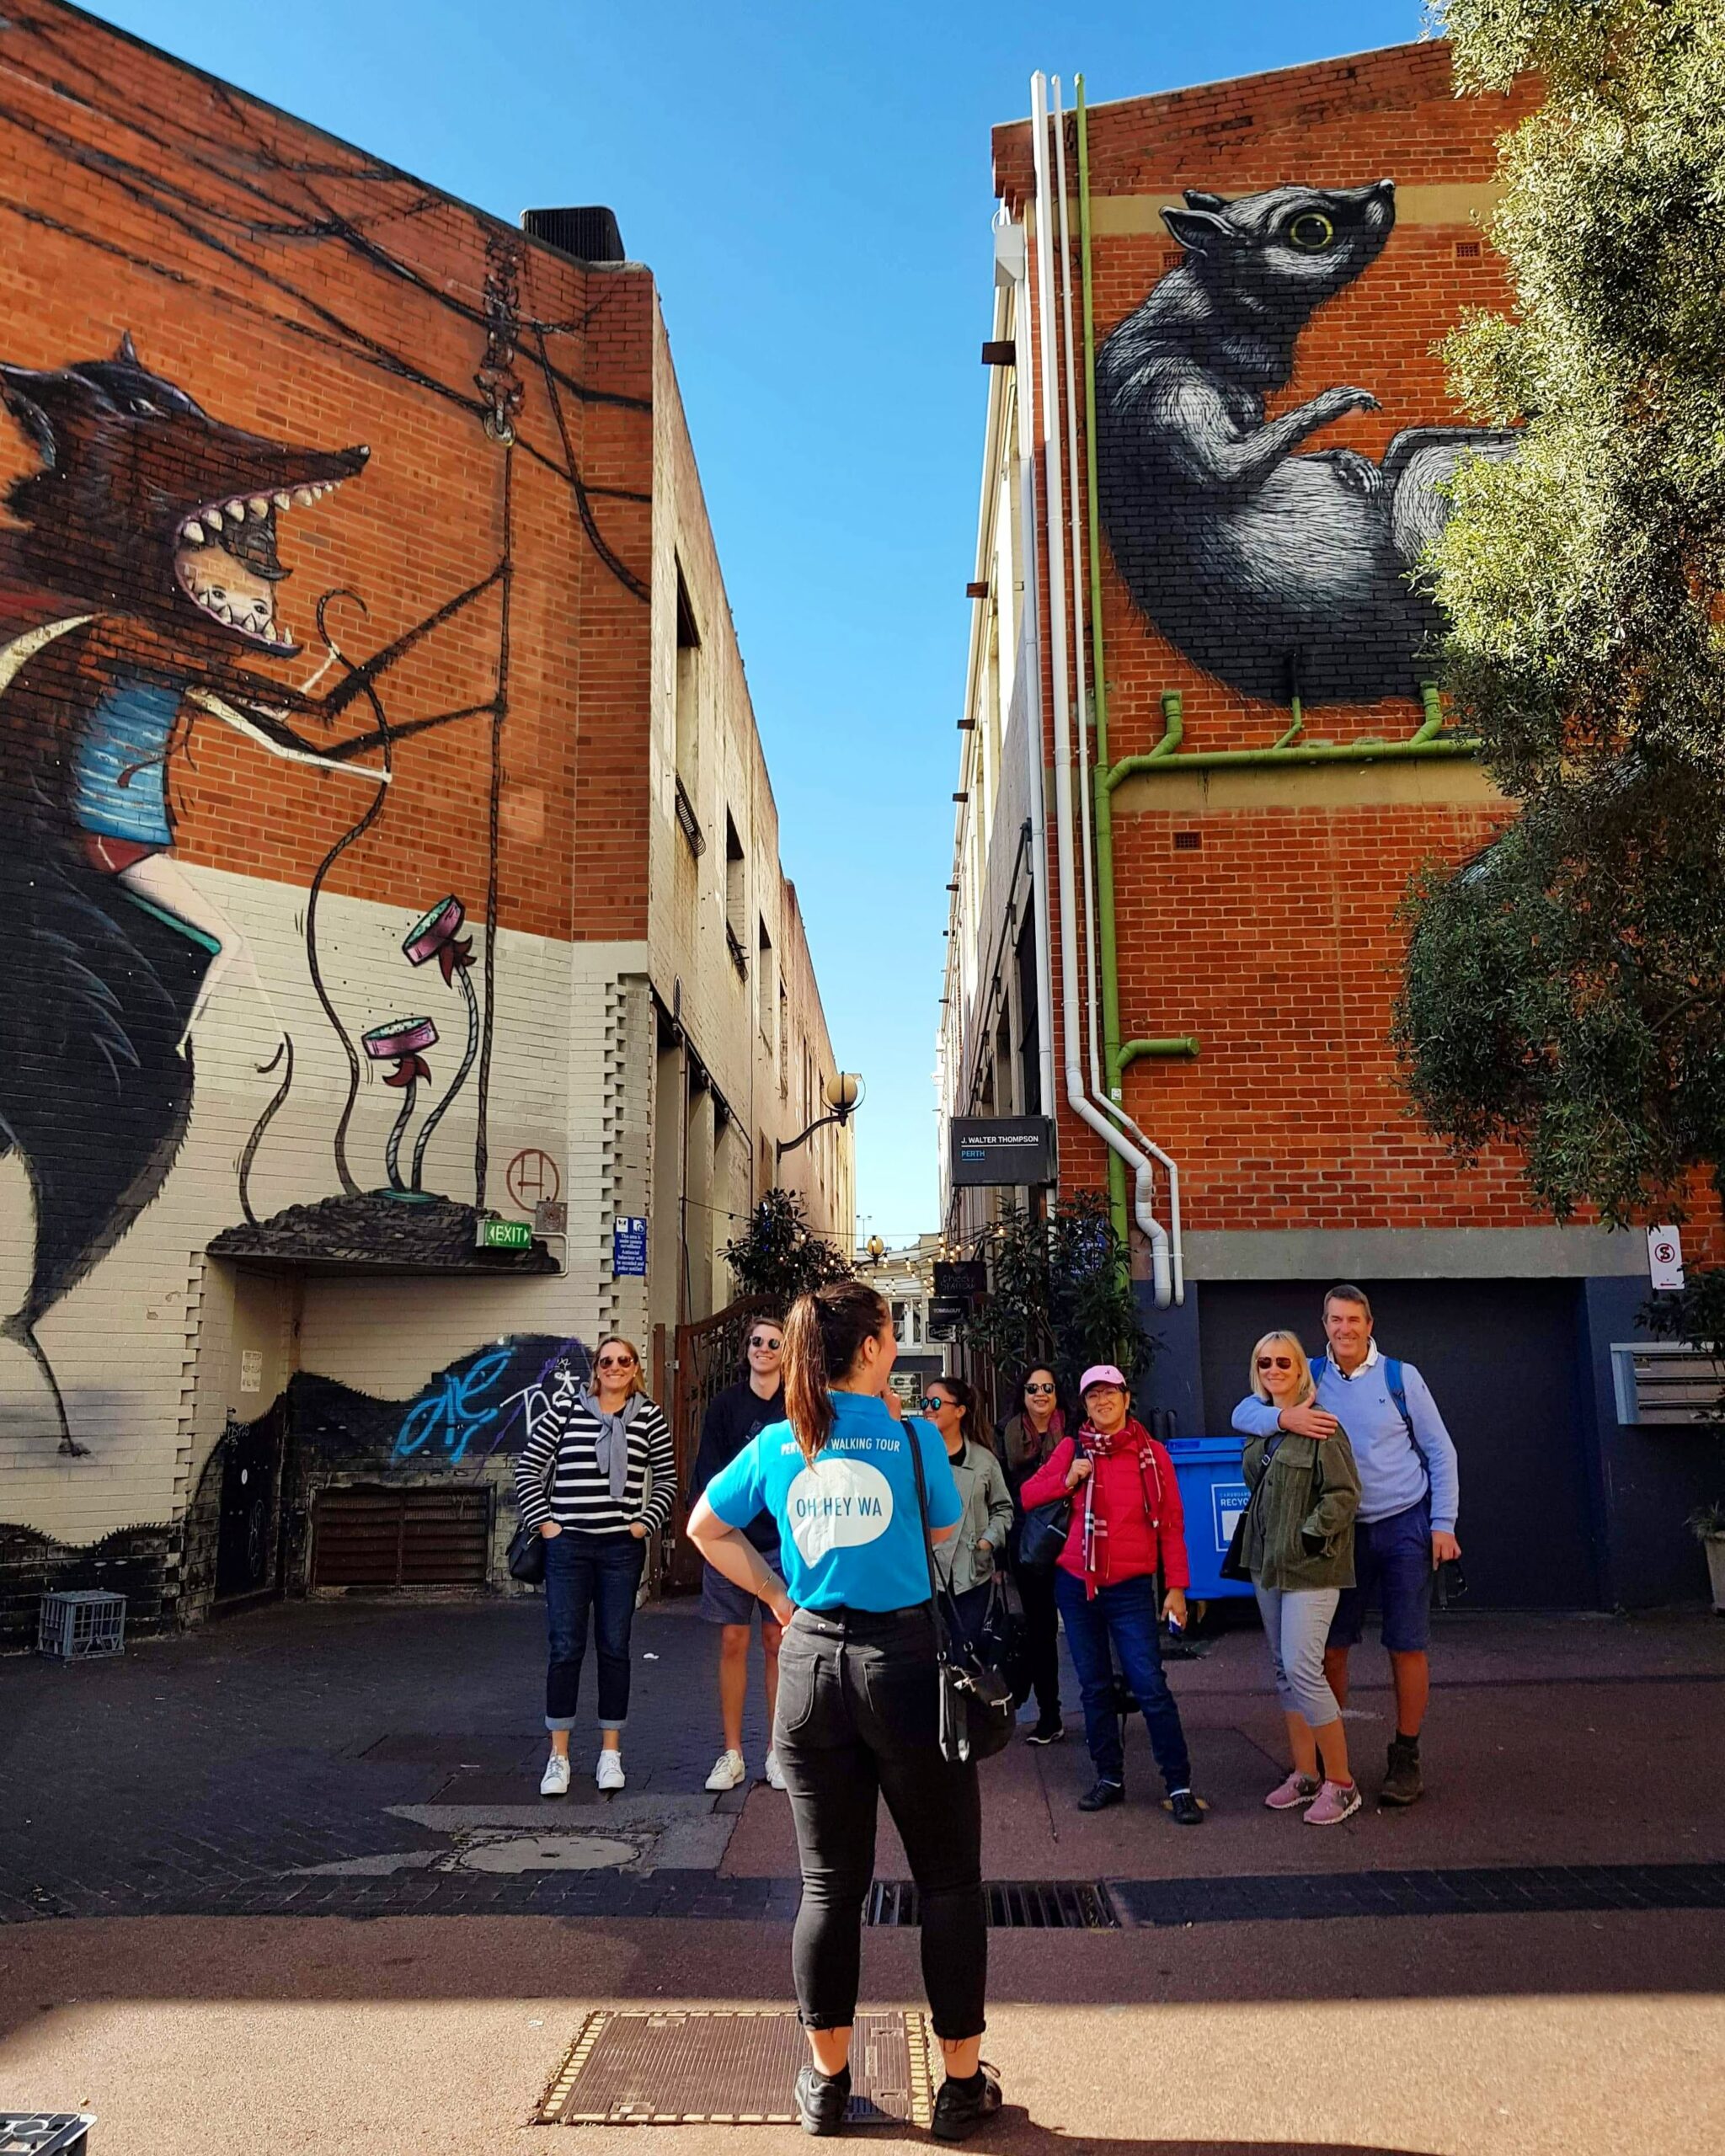 The ULTIMATE Perth Walking Tour